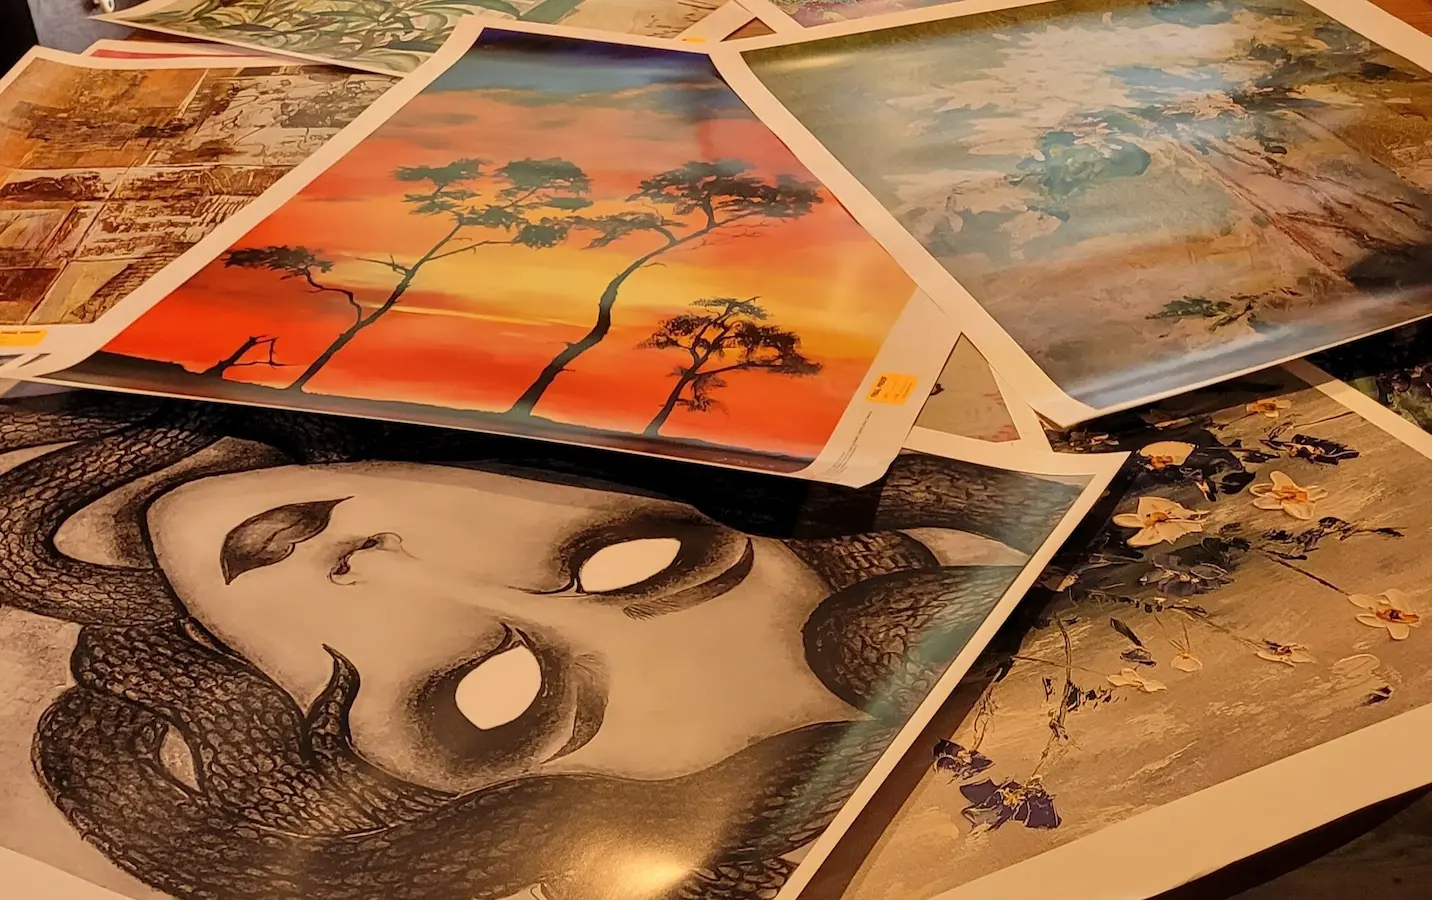 Proofs (art prints to be approved or "proofed" before using to make puzzles) scattered across the table.